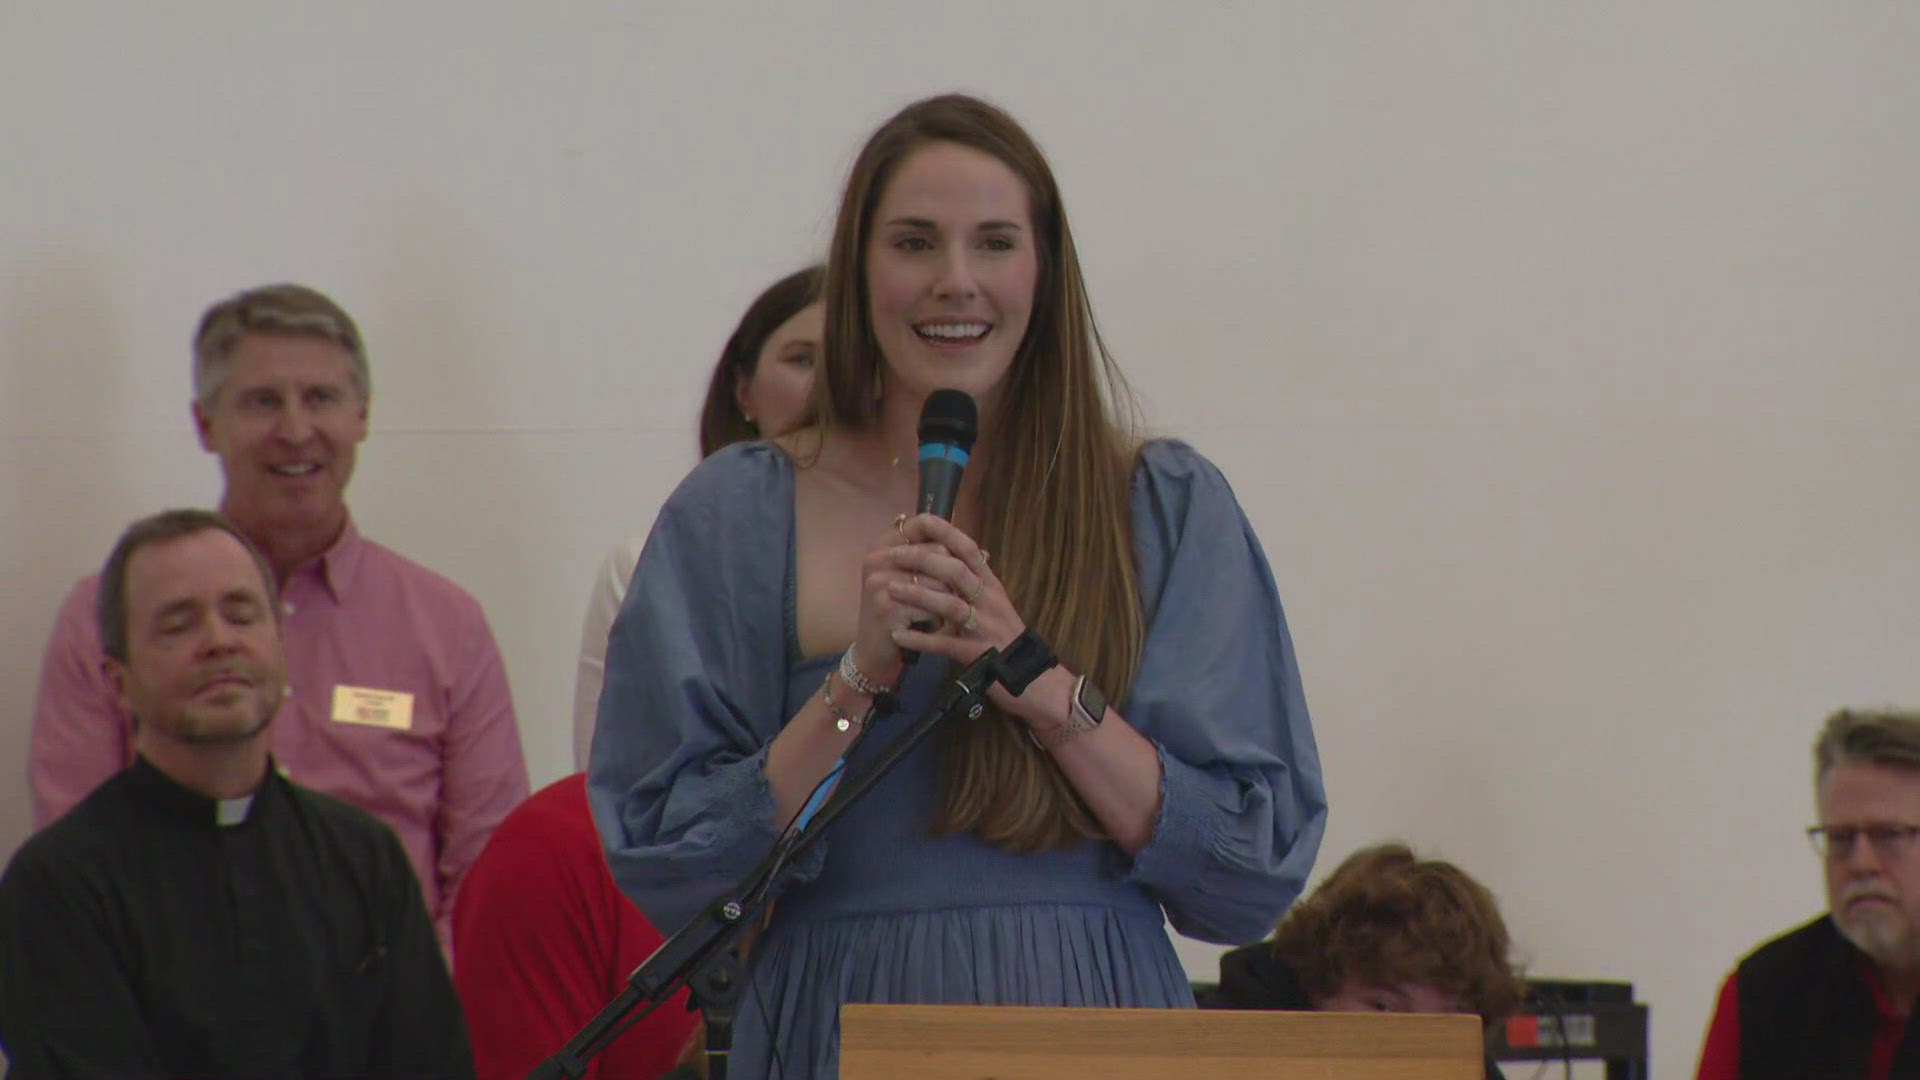 Five-time Olympic gold medalist Missy Franklin was back home Thursday to be honored by her high school.